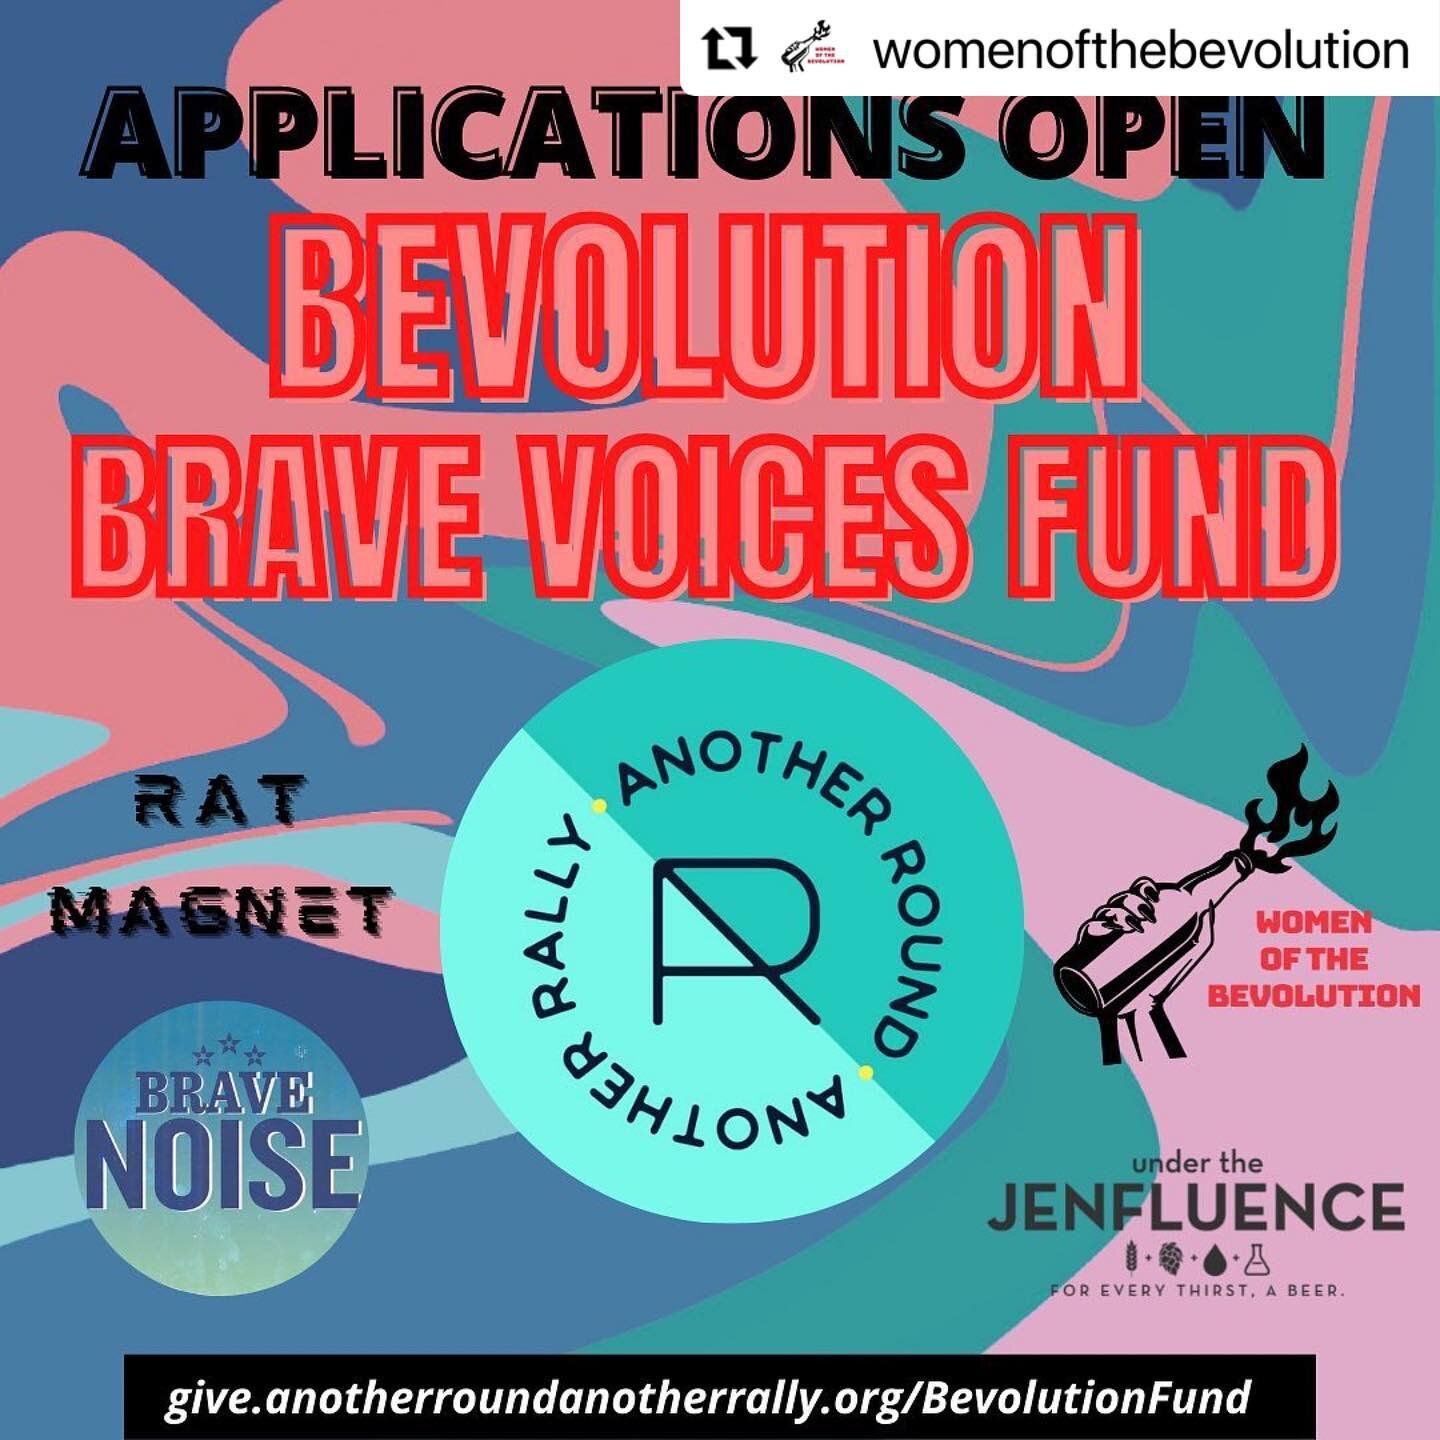 #Repost @womenofthebevolution 
・・・
Applications are now open for the Bevolution Brave Voices Fund! In partnership with non-profit @anotherroundanotherrally, Brienne Allan @ratmagnet and Jen Blair @underthejenfluence, this fund is to provide financial